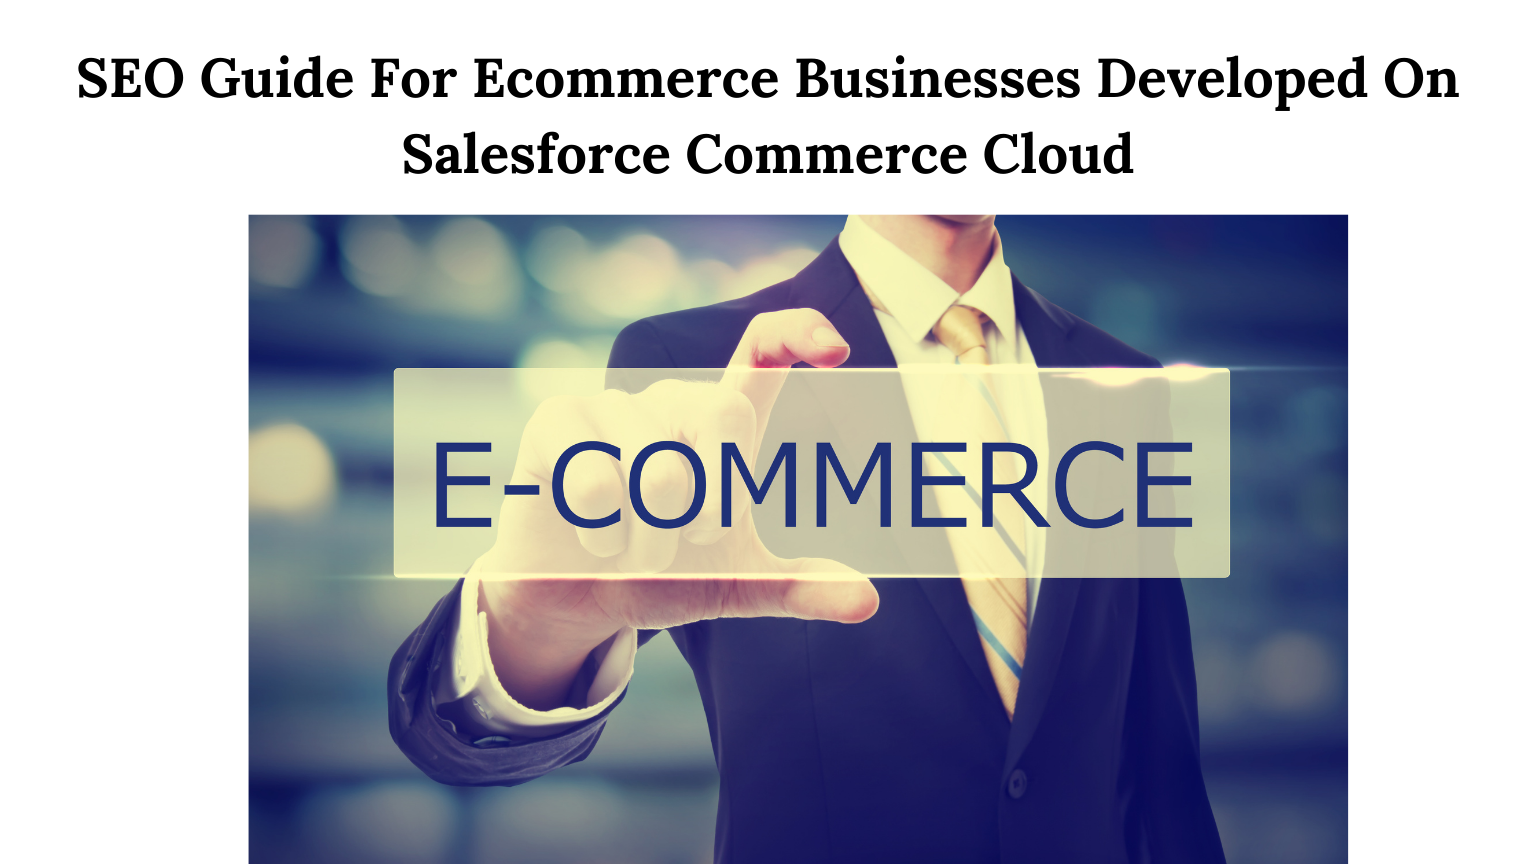 SEO-Guide-For-Ecommerce-Businesses-Developed-On-Salesforce-Commerce-Cloud